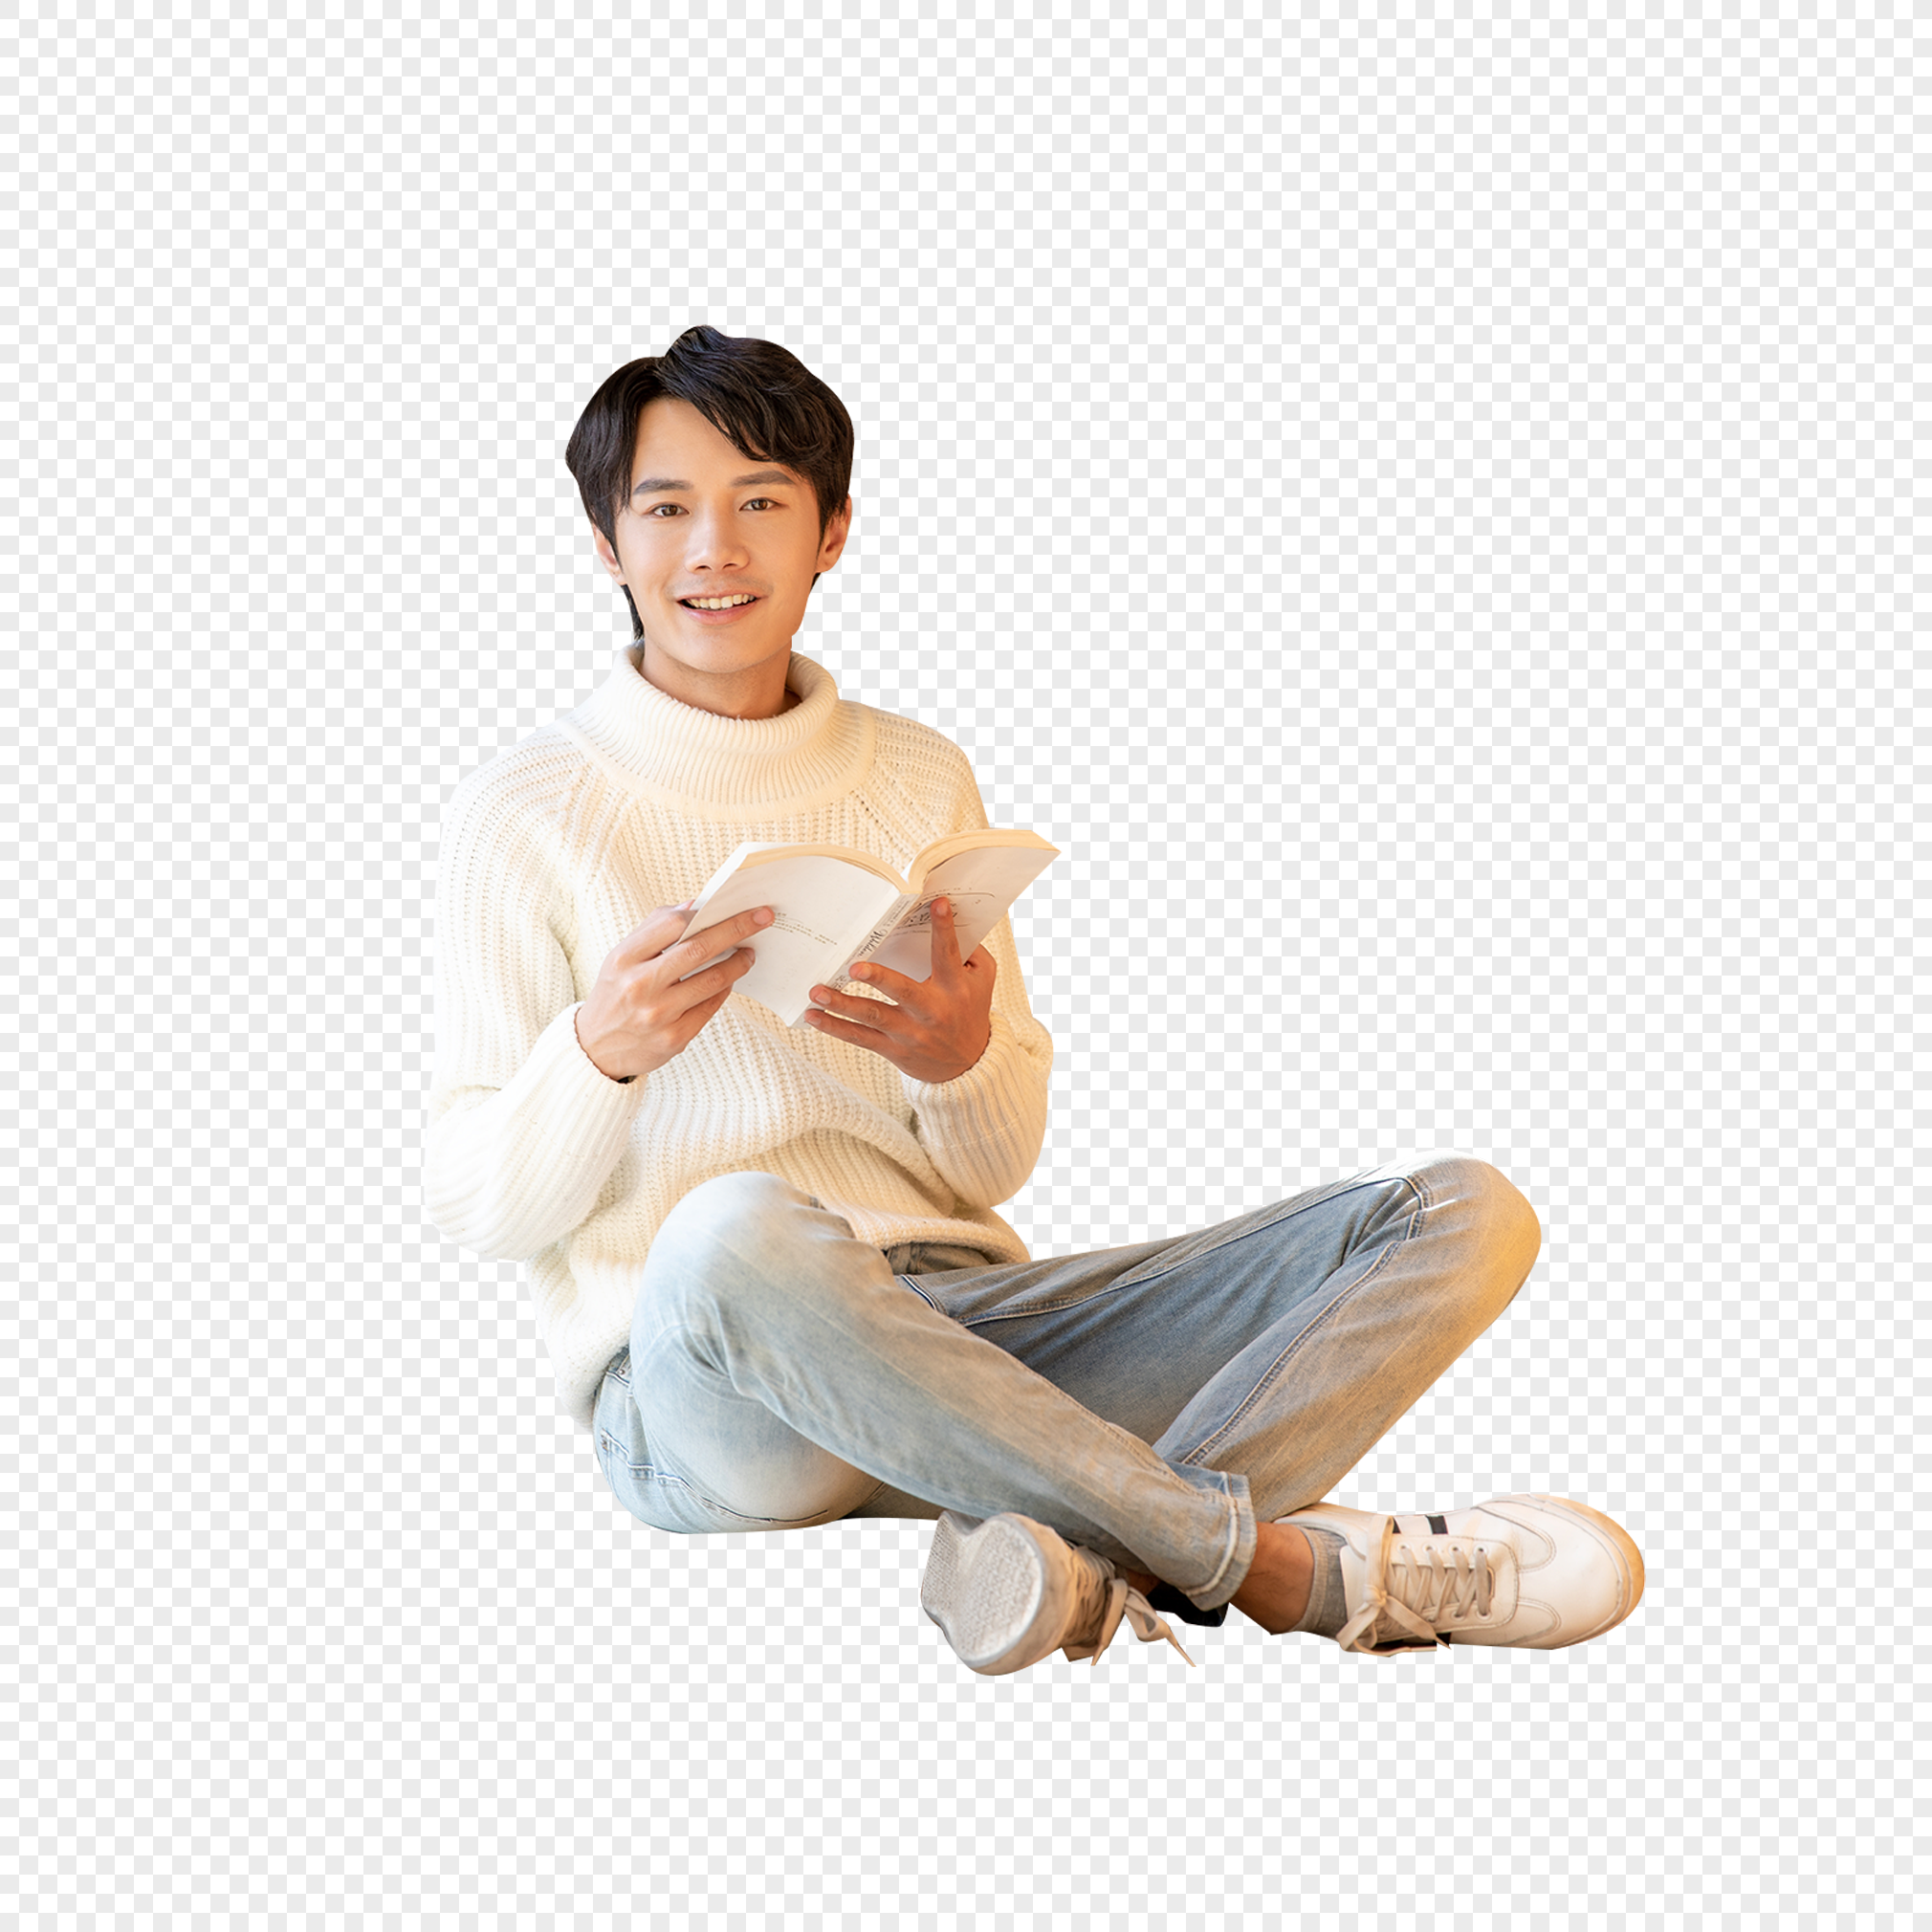 Male sitting on library floor and reading book, young, leisure office, book png free download